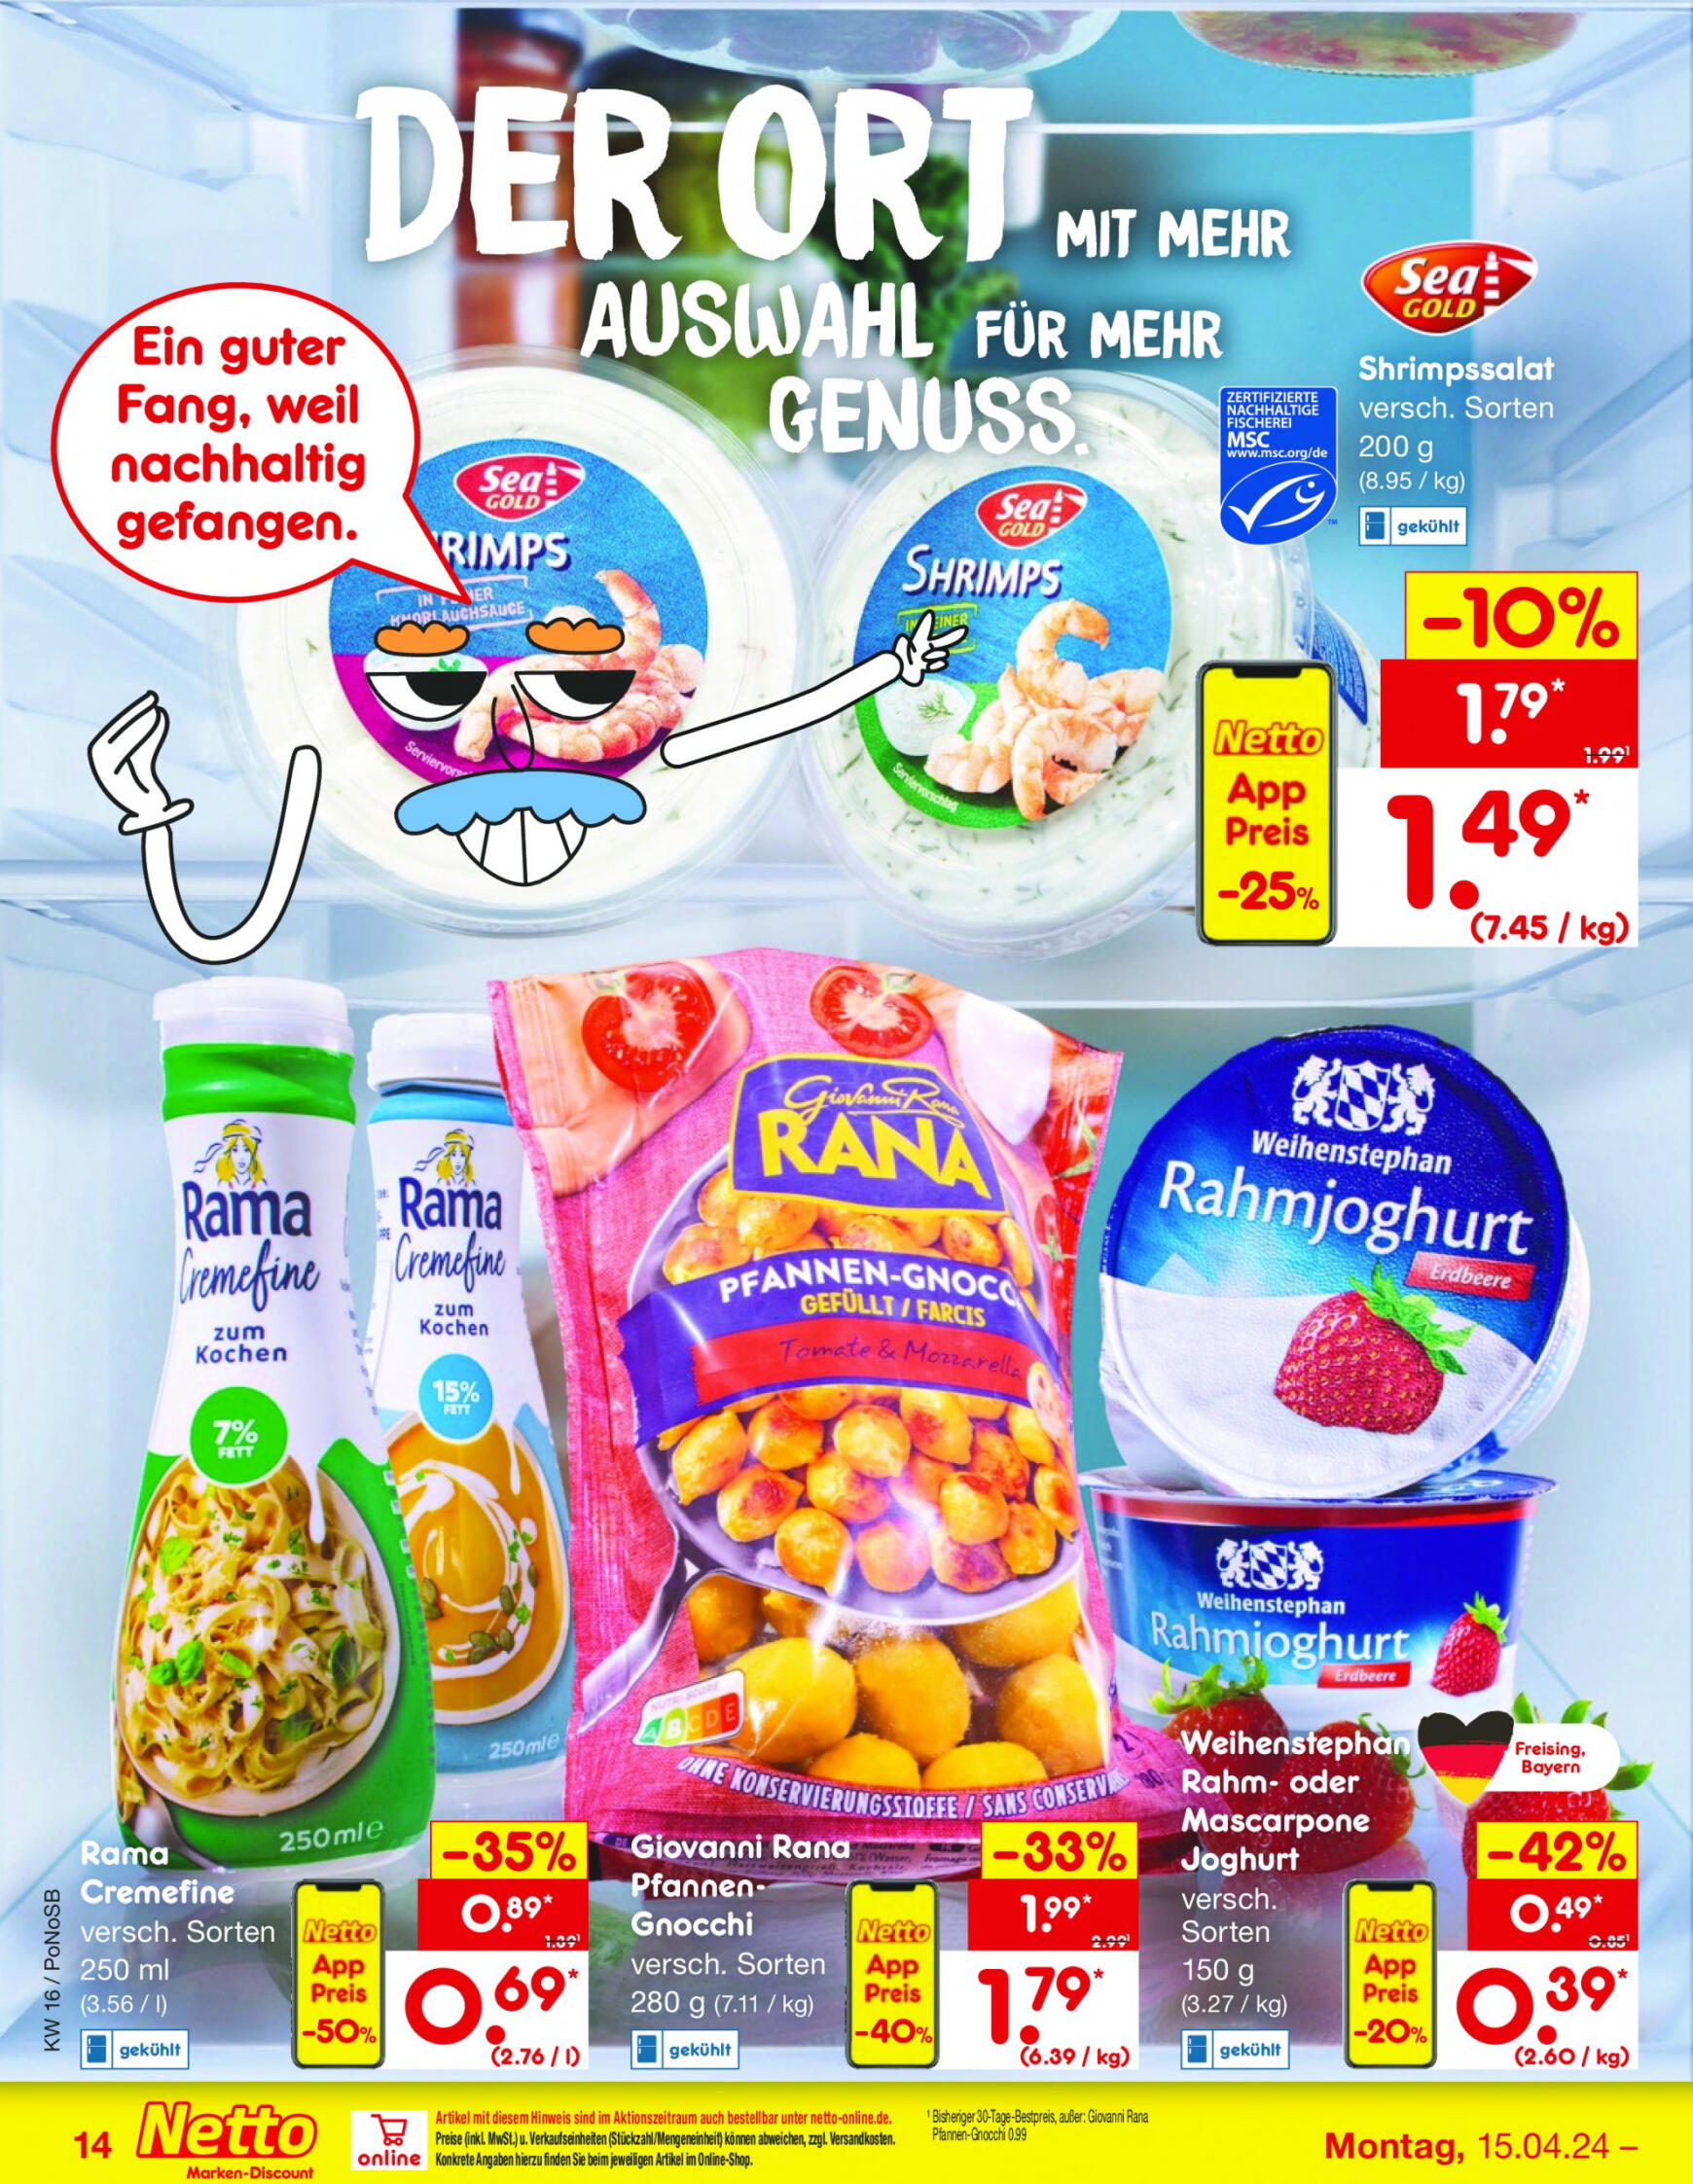 netto - Flyer Netto aktuell 15.04. - 20.04. - page: 14